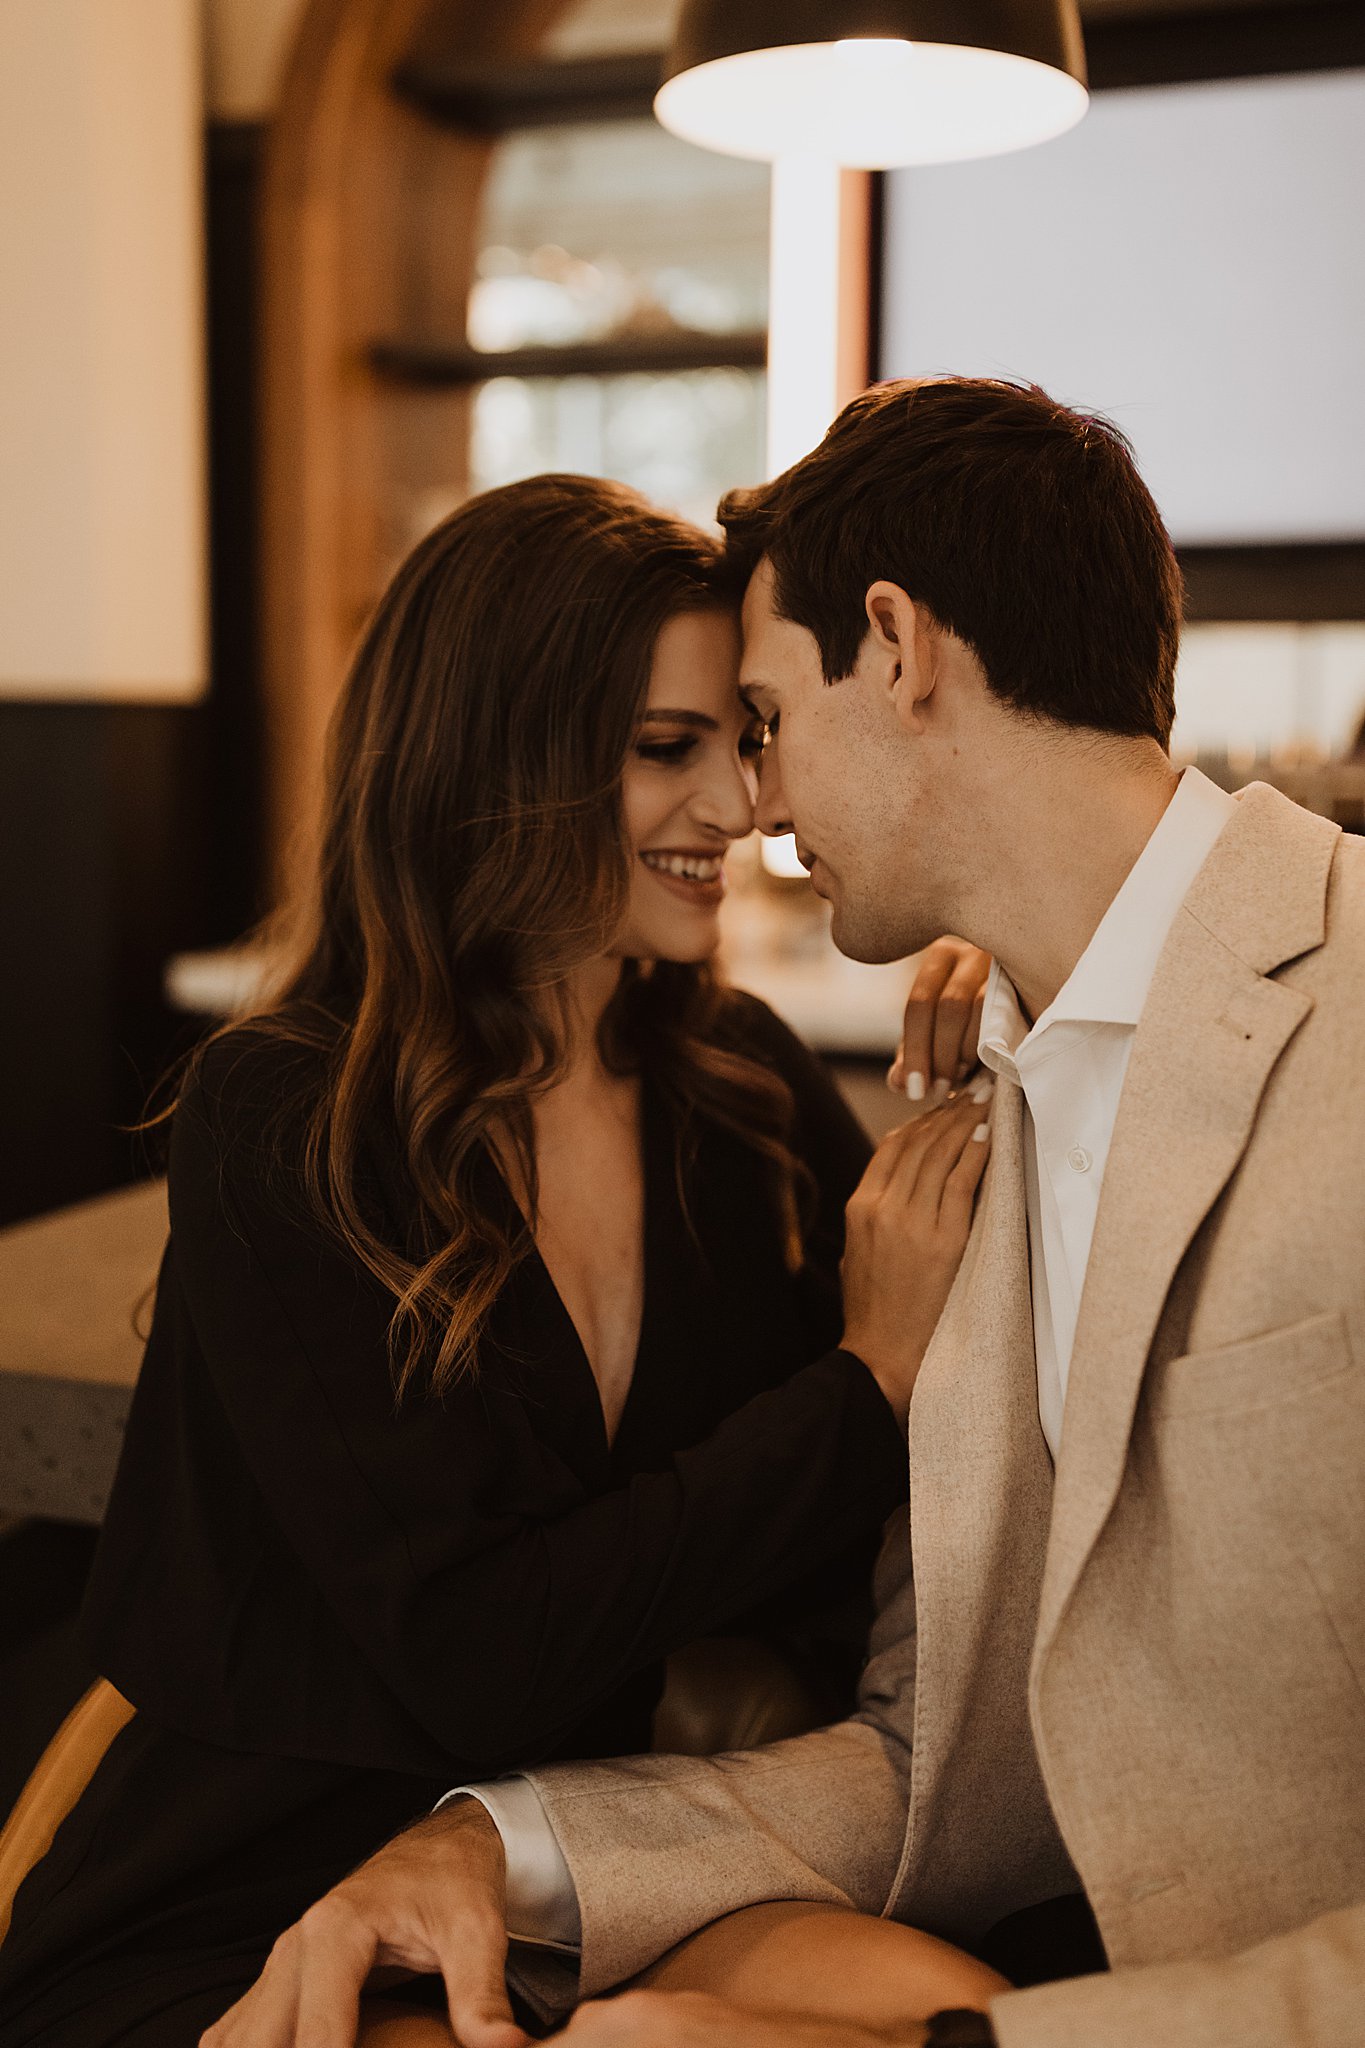 The Last Hotel Engagement Session